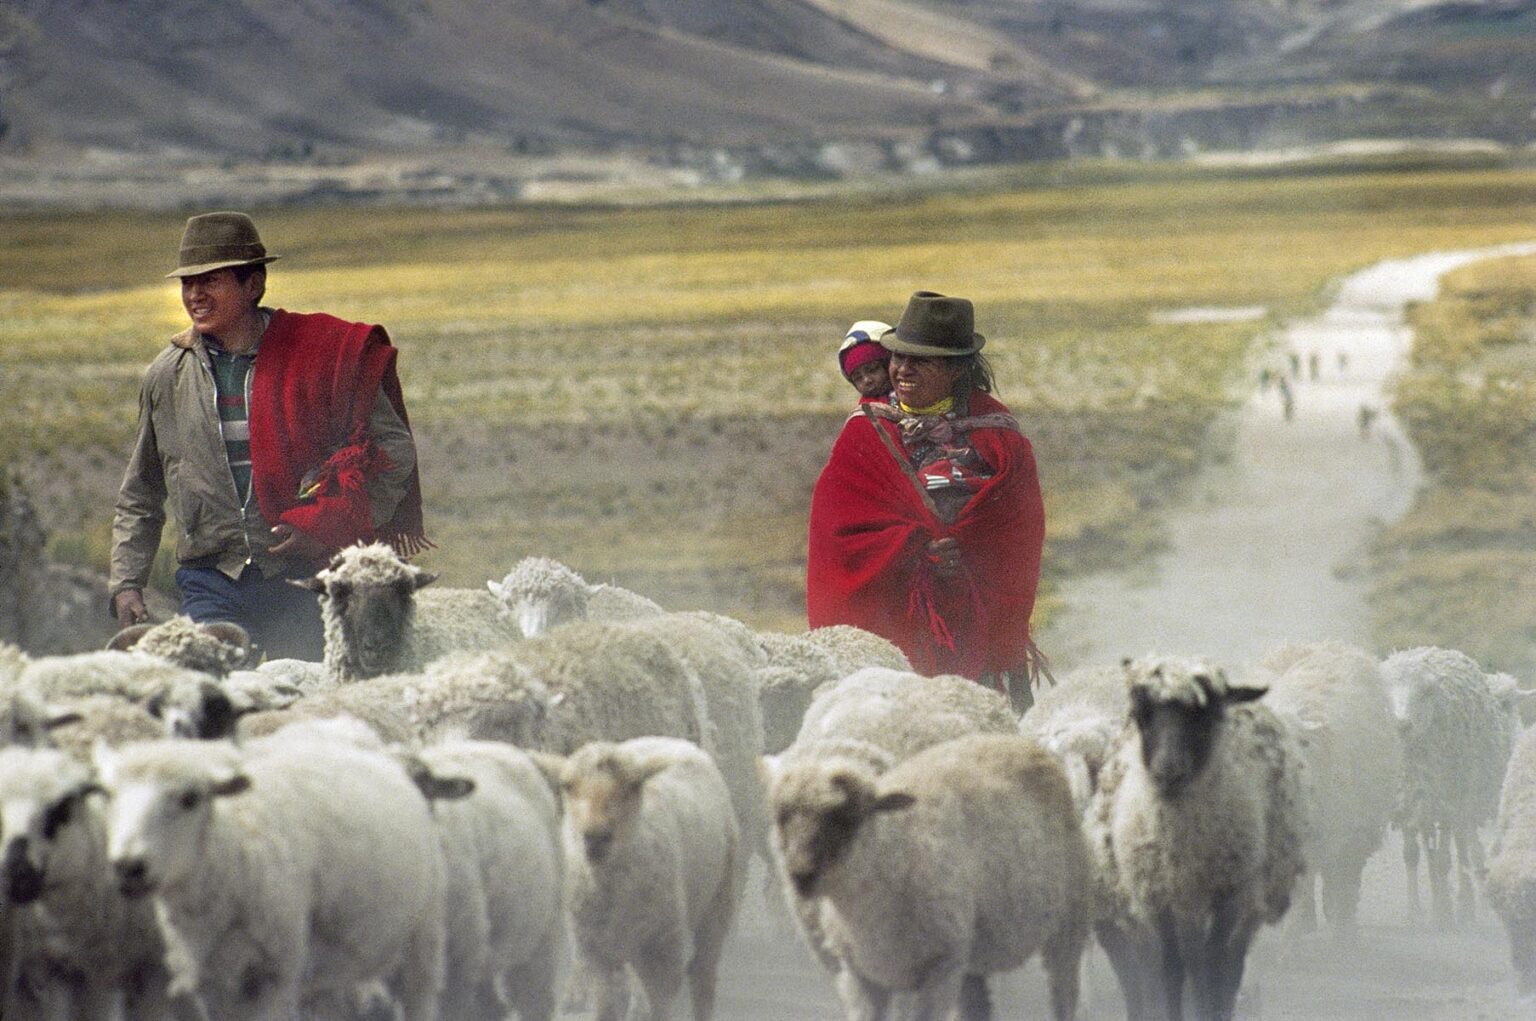 SHEEP HERDERS in RED PONCHOS with SHEEP - ALTIPLANO (HIGH PLAIN), ECUADOR